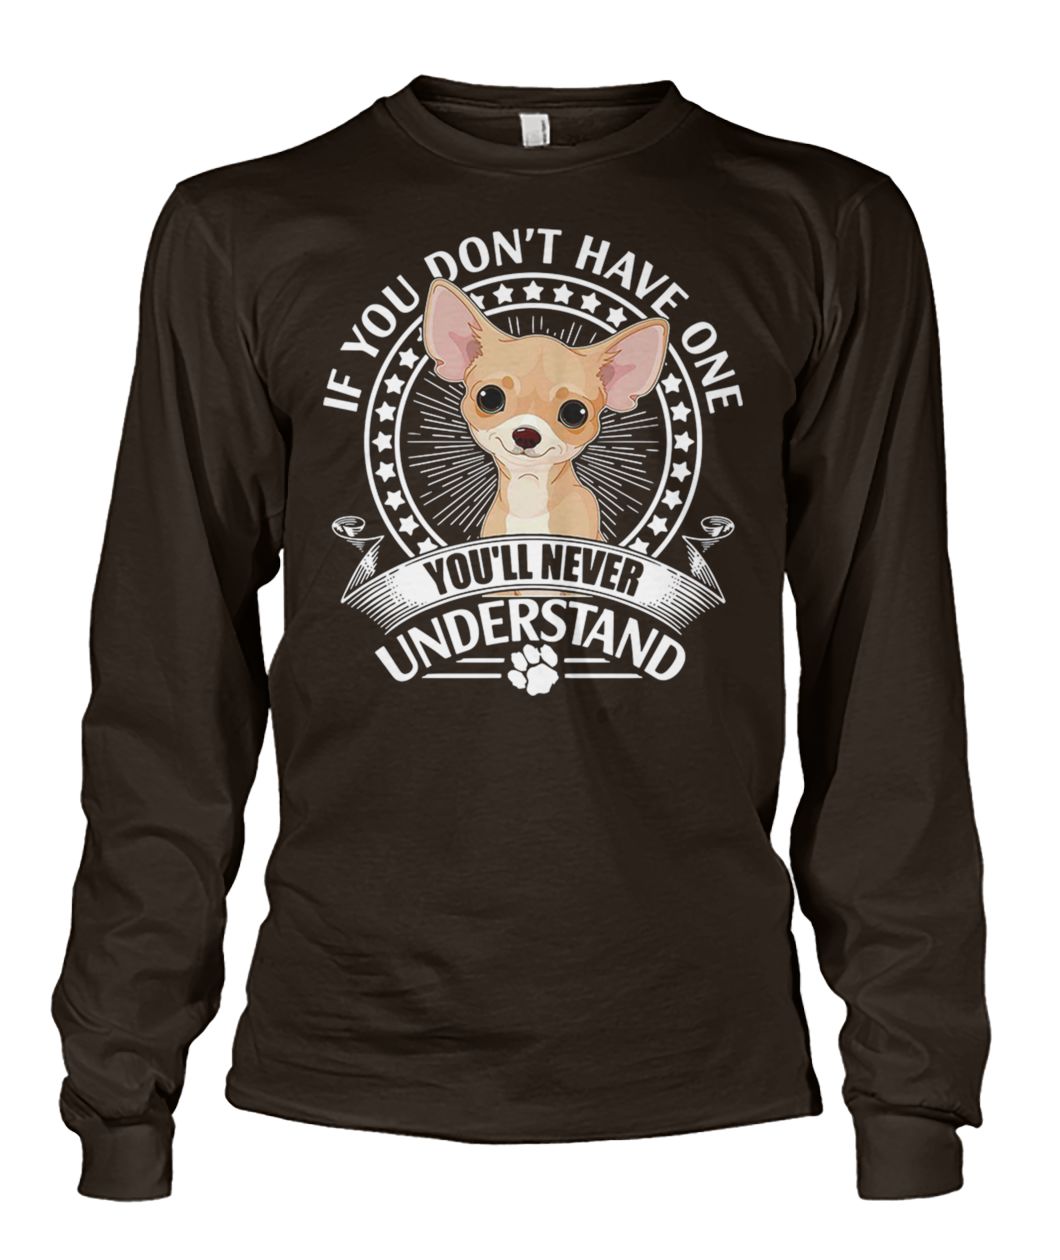 If you don't have one chihuahua you'll never understand unisex long sleeve